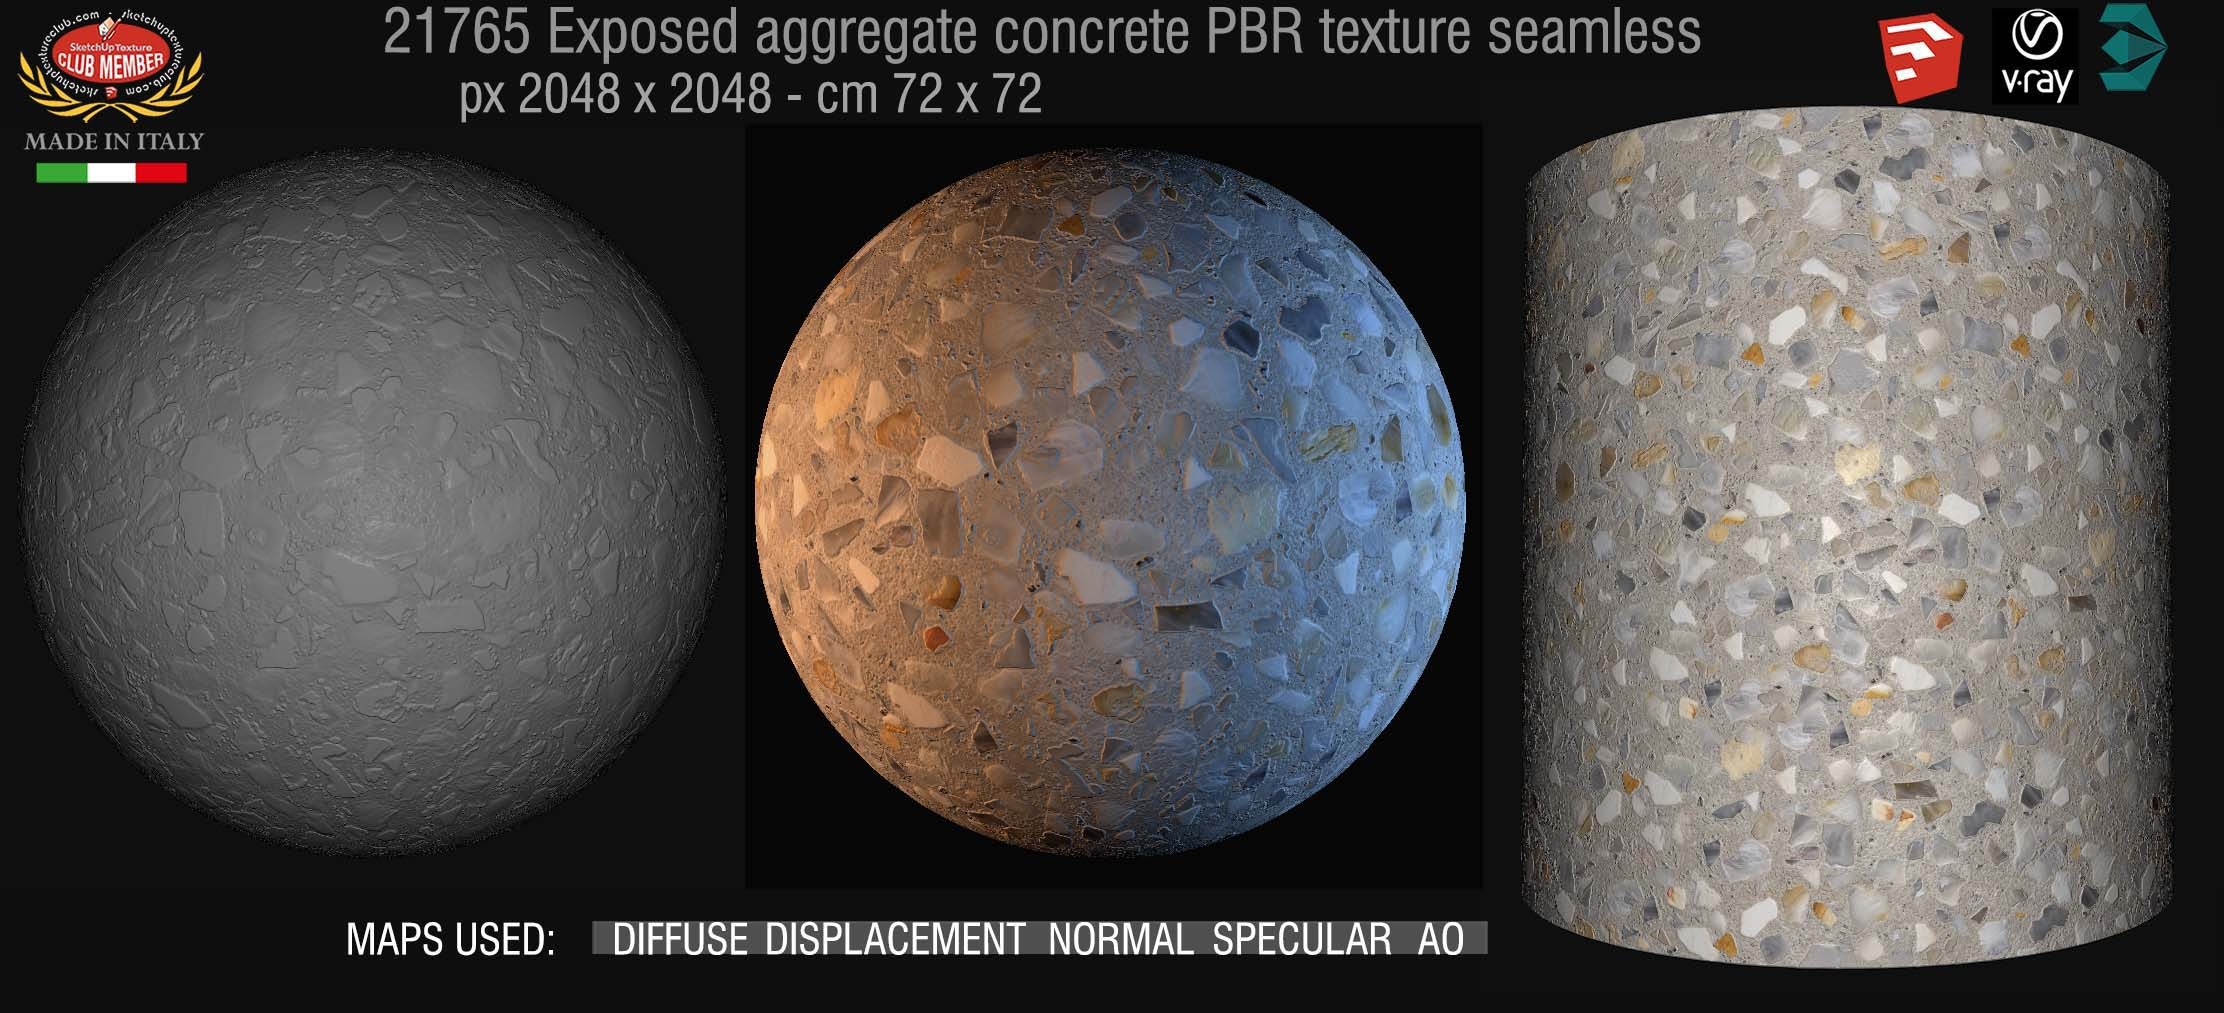 21765 Exposed aggregate concrete PBR textures seamless DEMO